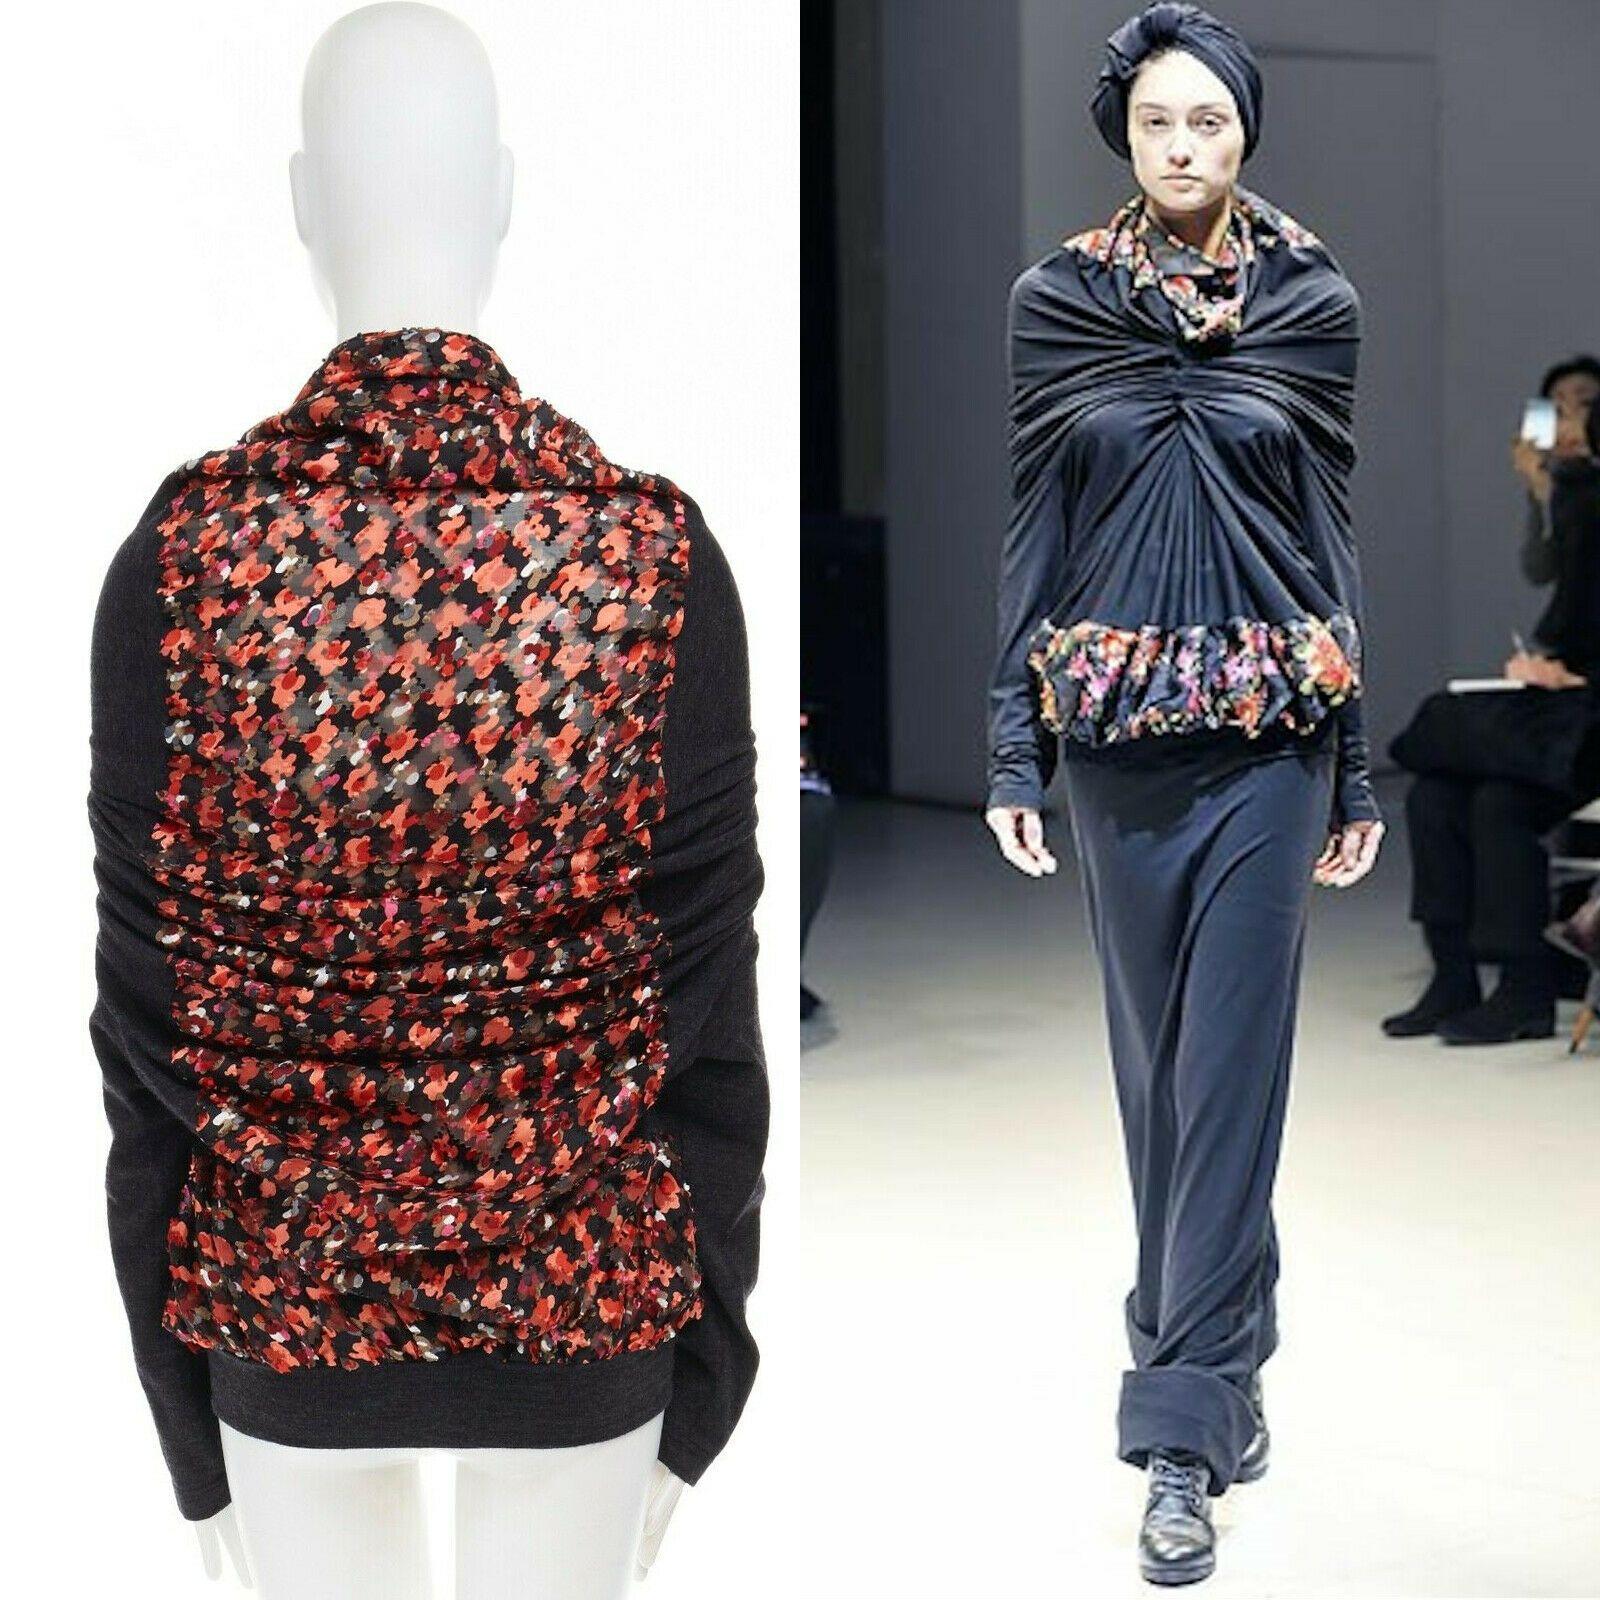 runway JUNYA WATANABE AW08 pink floral print ruched gather front sweater top S

JUNYA WATANABE
FROM THE FALL WINTER 2008 RUNWAY
WOOL. DARK GREY. CORAL RED AND PINK ABSTRACT TEXTURED PRINTED FABRIC AT COLLAR, FULL BACK AND HEM. CROSSOVER FAUX KNOT